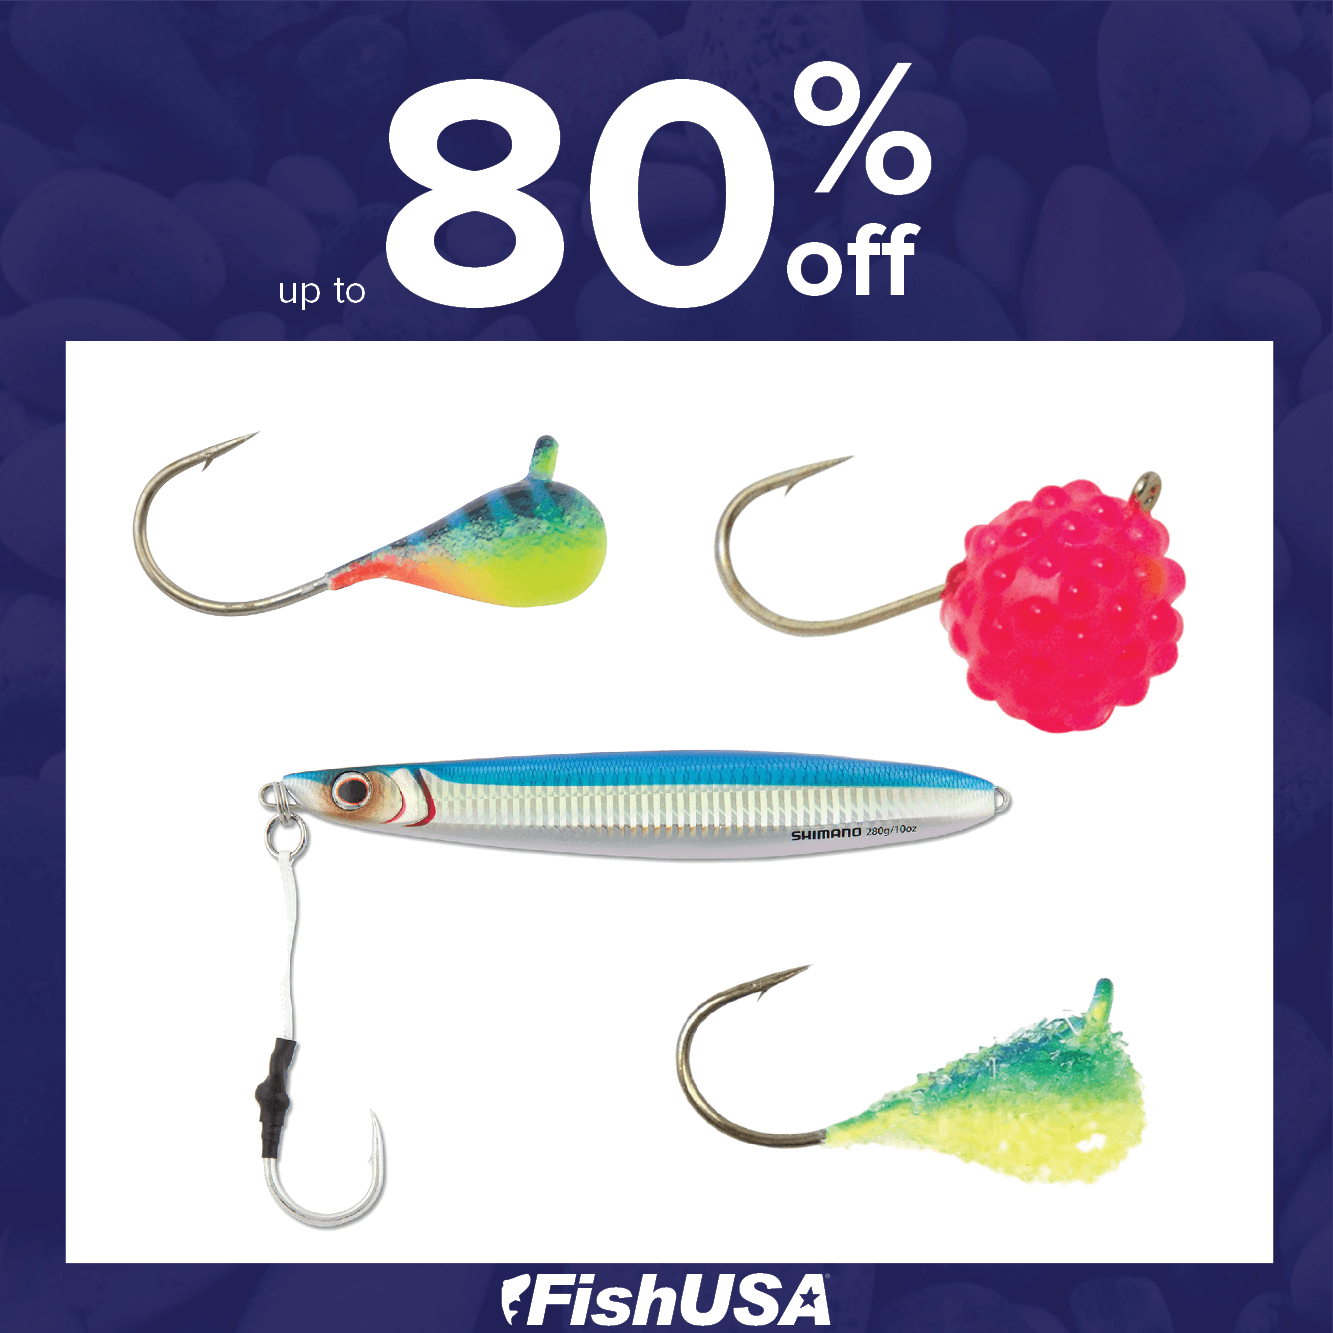 Up to 80% off Clearance Lures & Bait